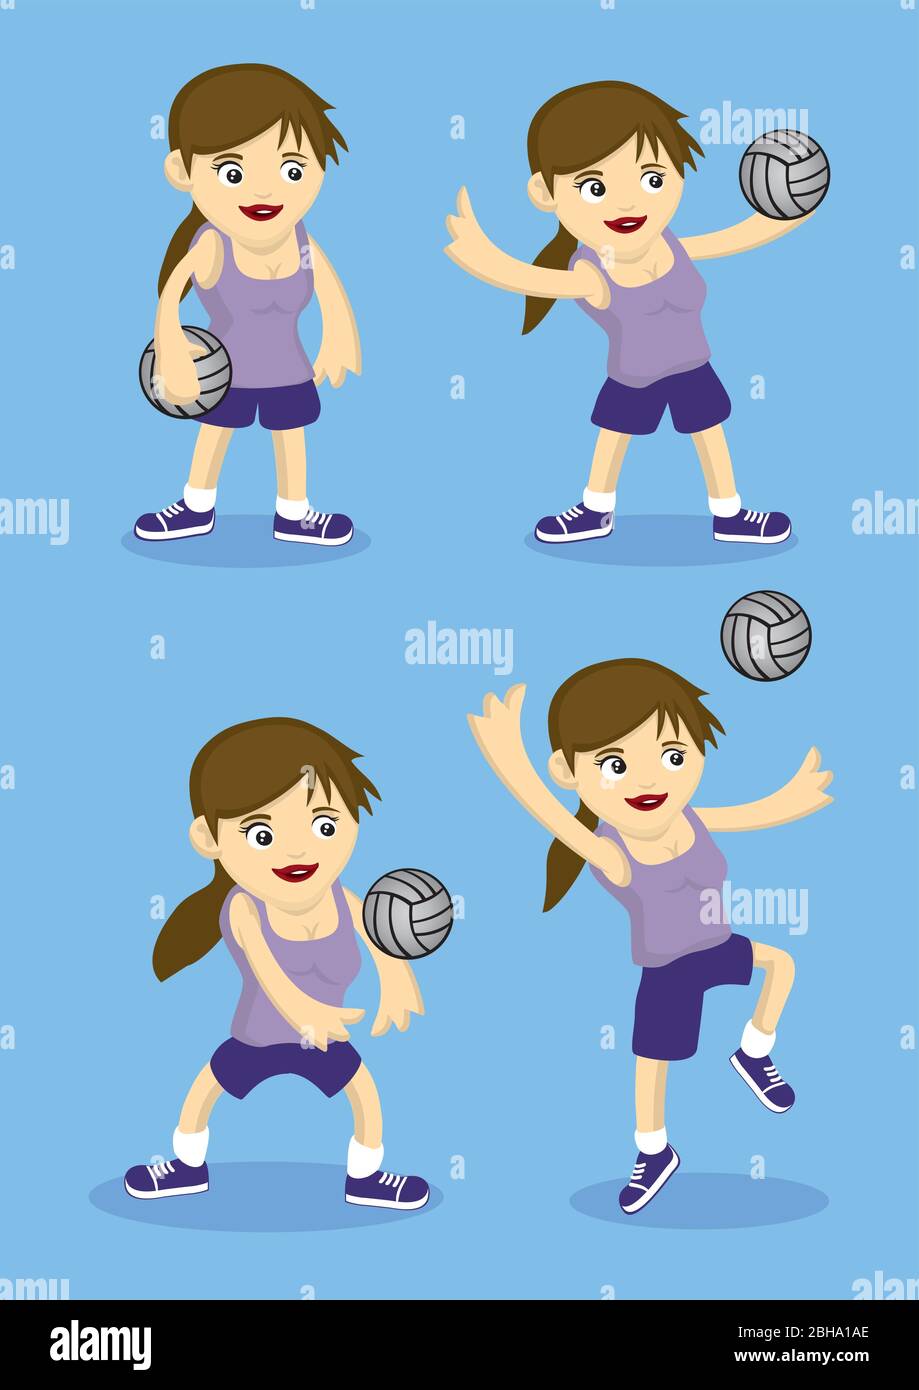 Set of four vector cartoon girl playing volley ball. Illustration isolated on blue background. Stock Vector